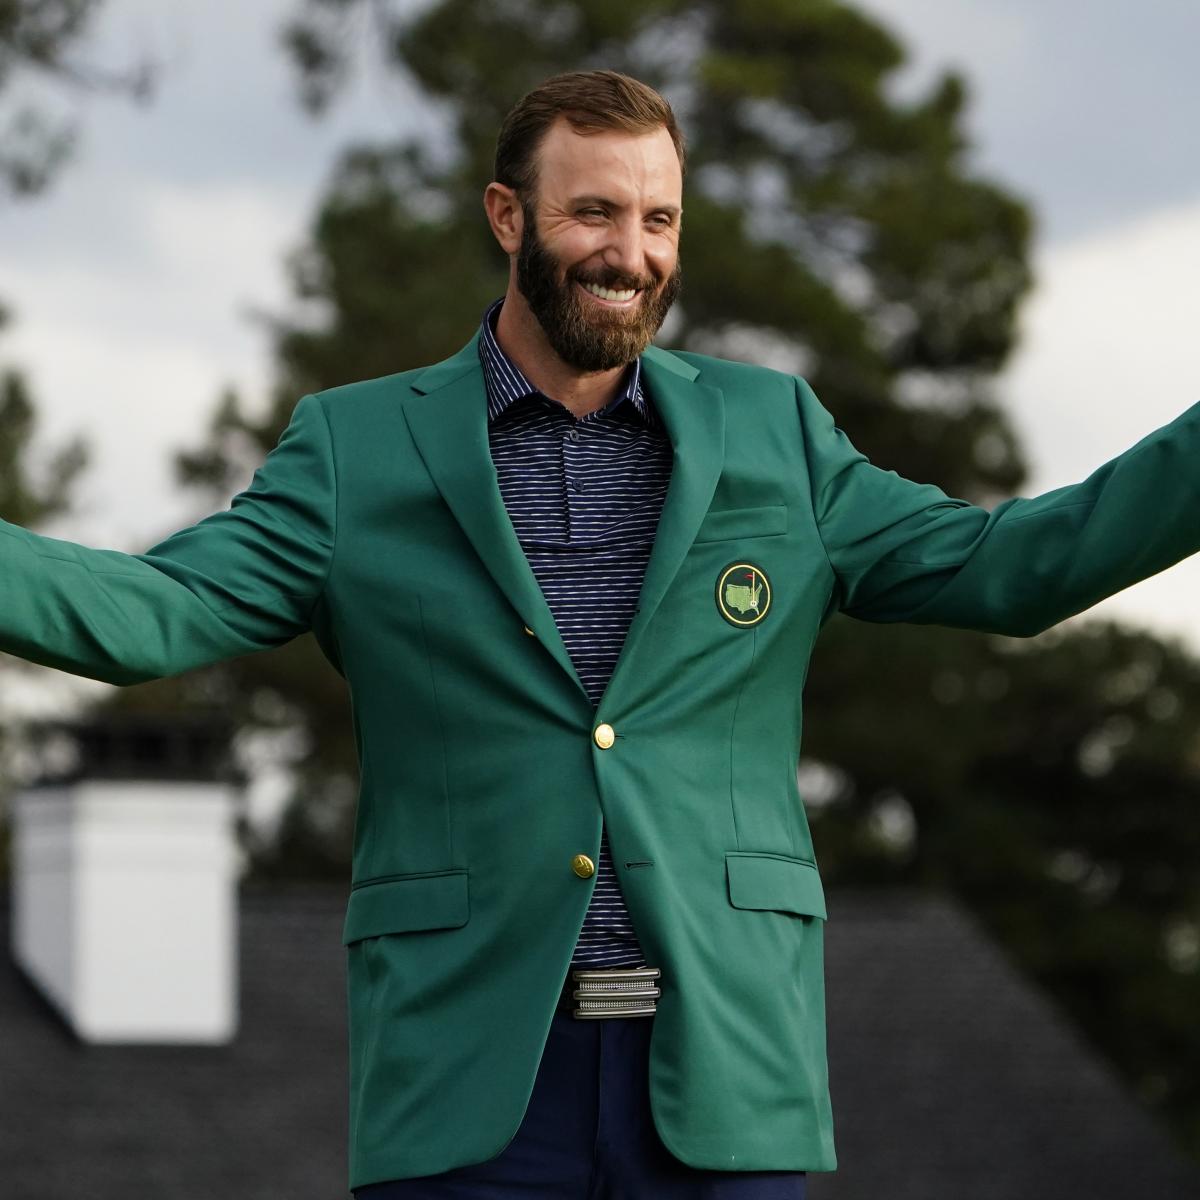 Masters 2020 Payout Prize Money and Purse Breakdown for Top Golfers